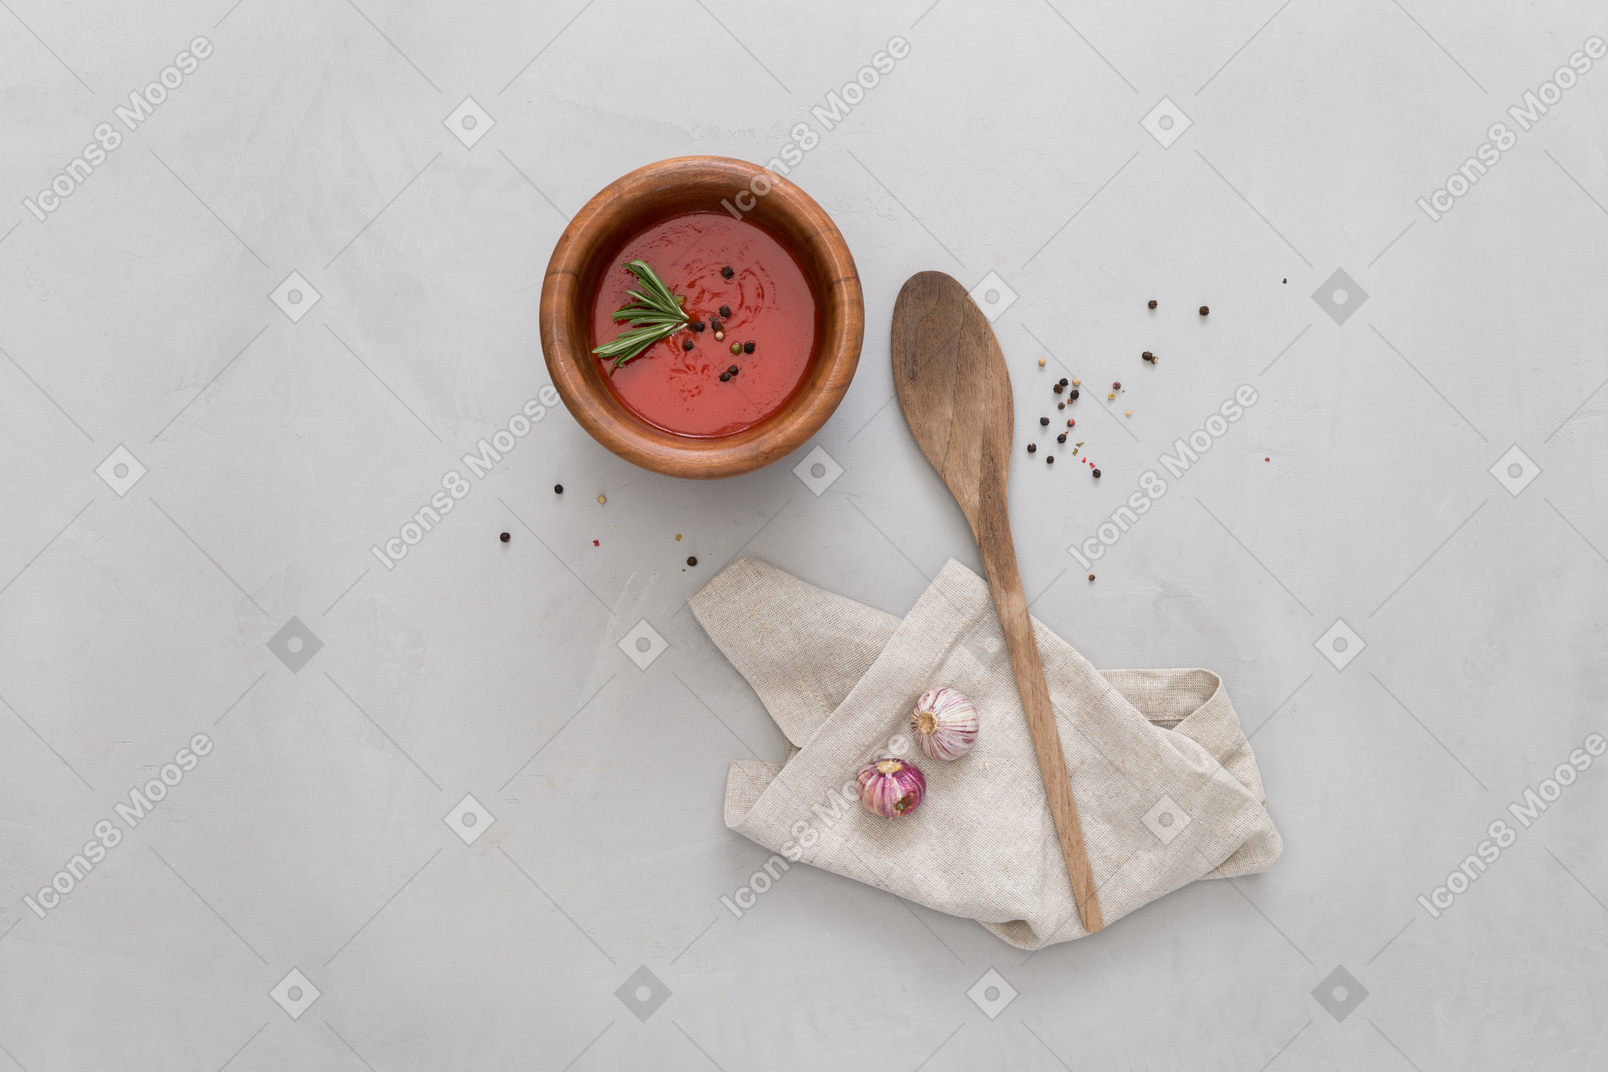 A bowl of gazpacho, some garlic and wooden spoon